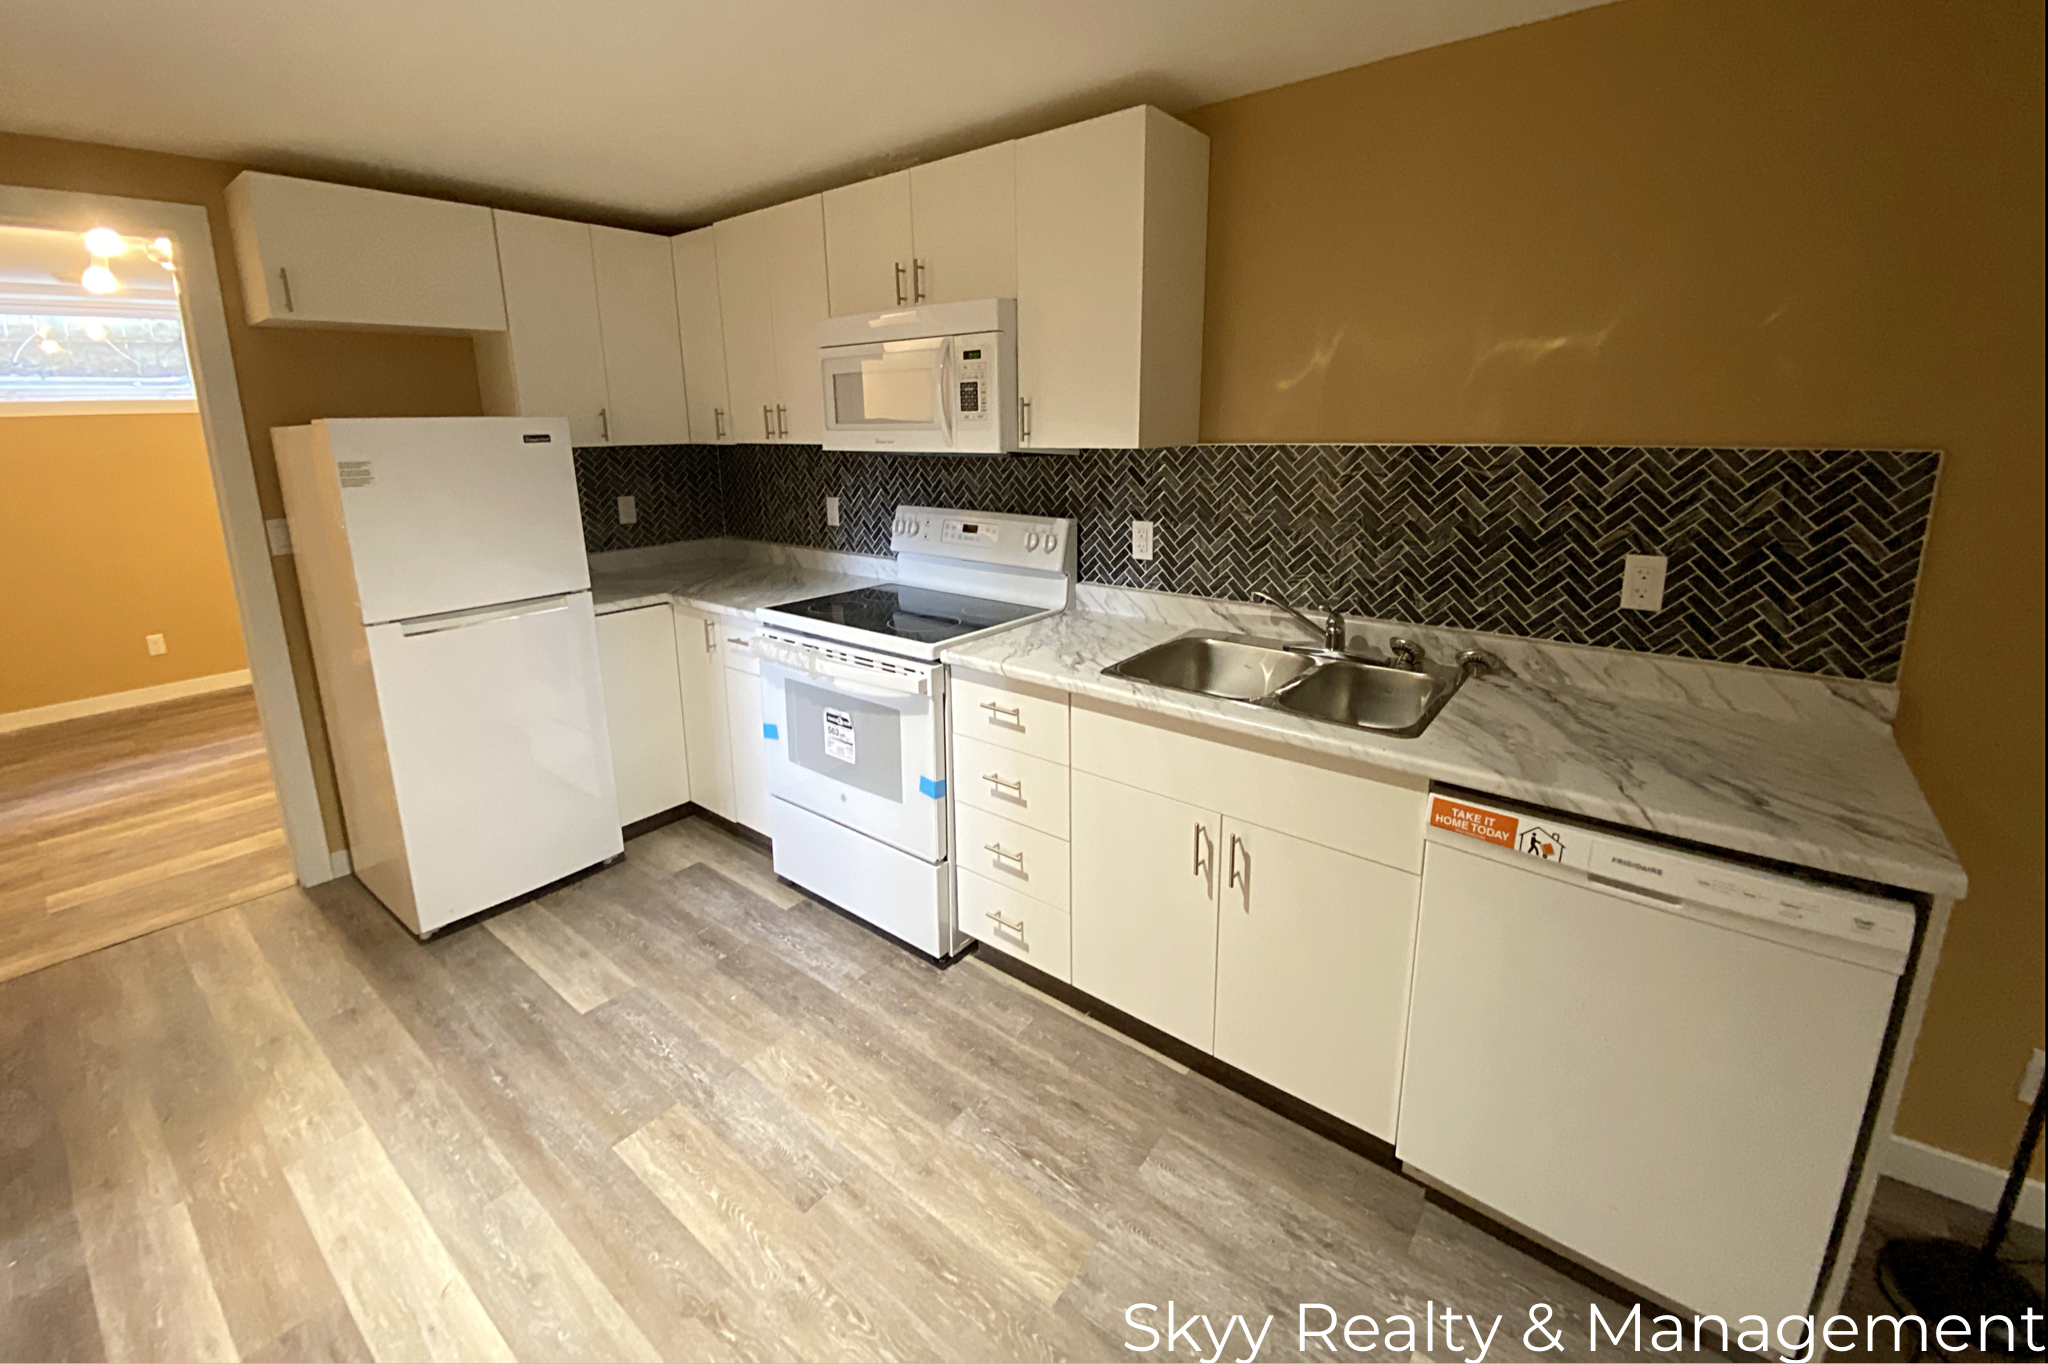 Main Photo: 5623 142 Ave in Edmonton: House for rent